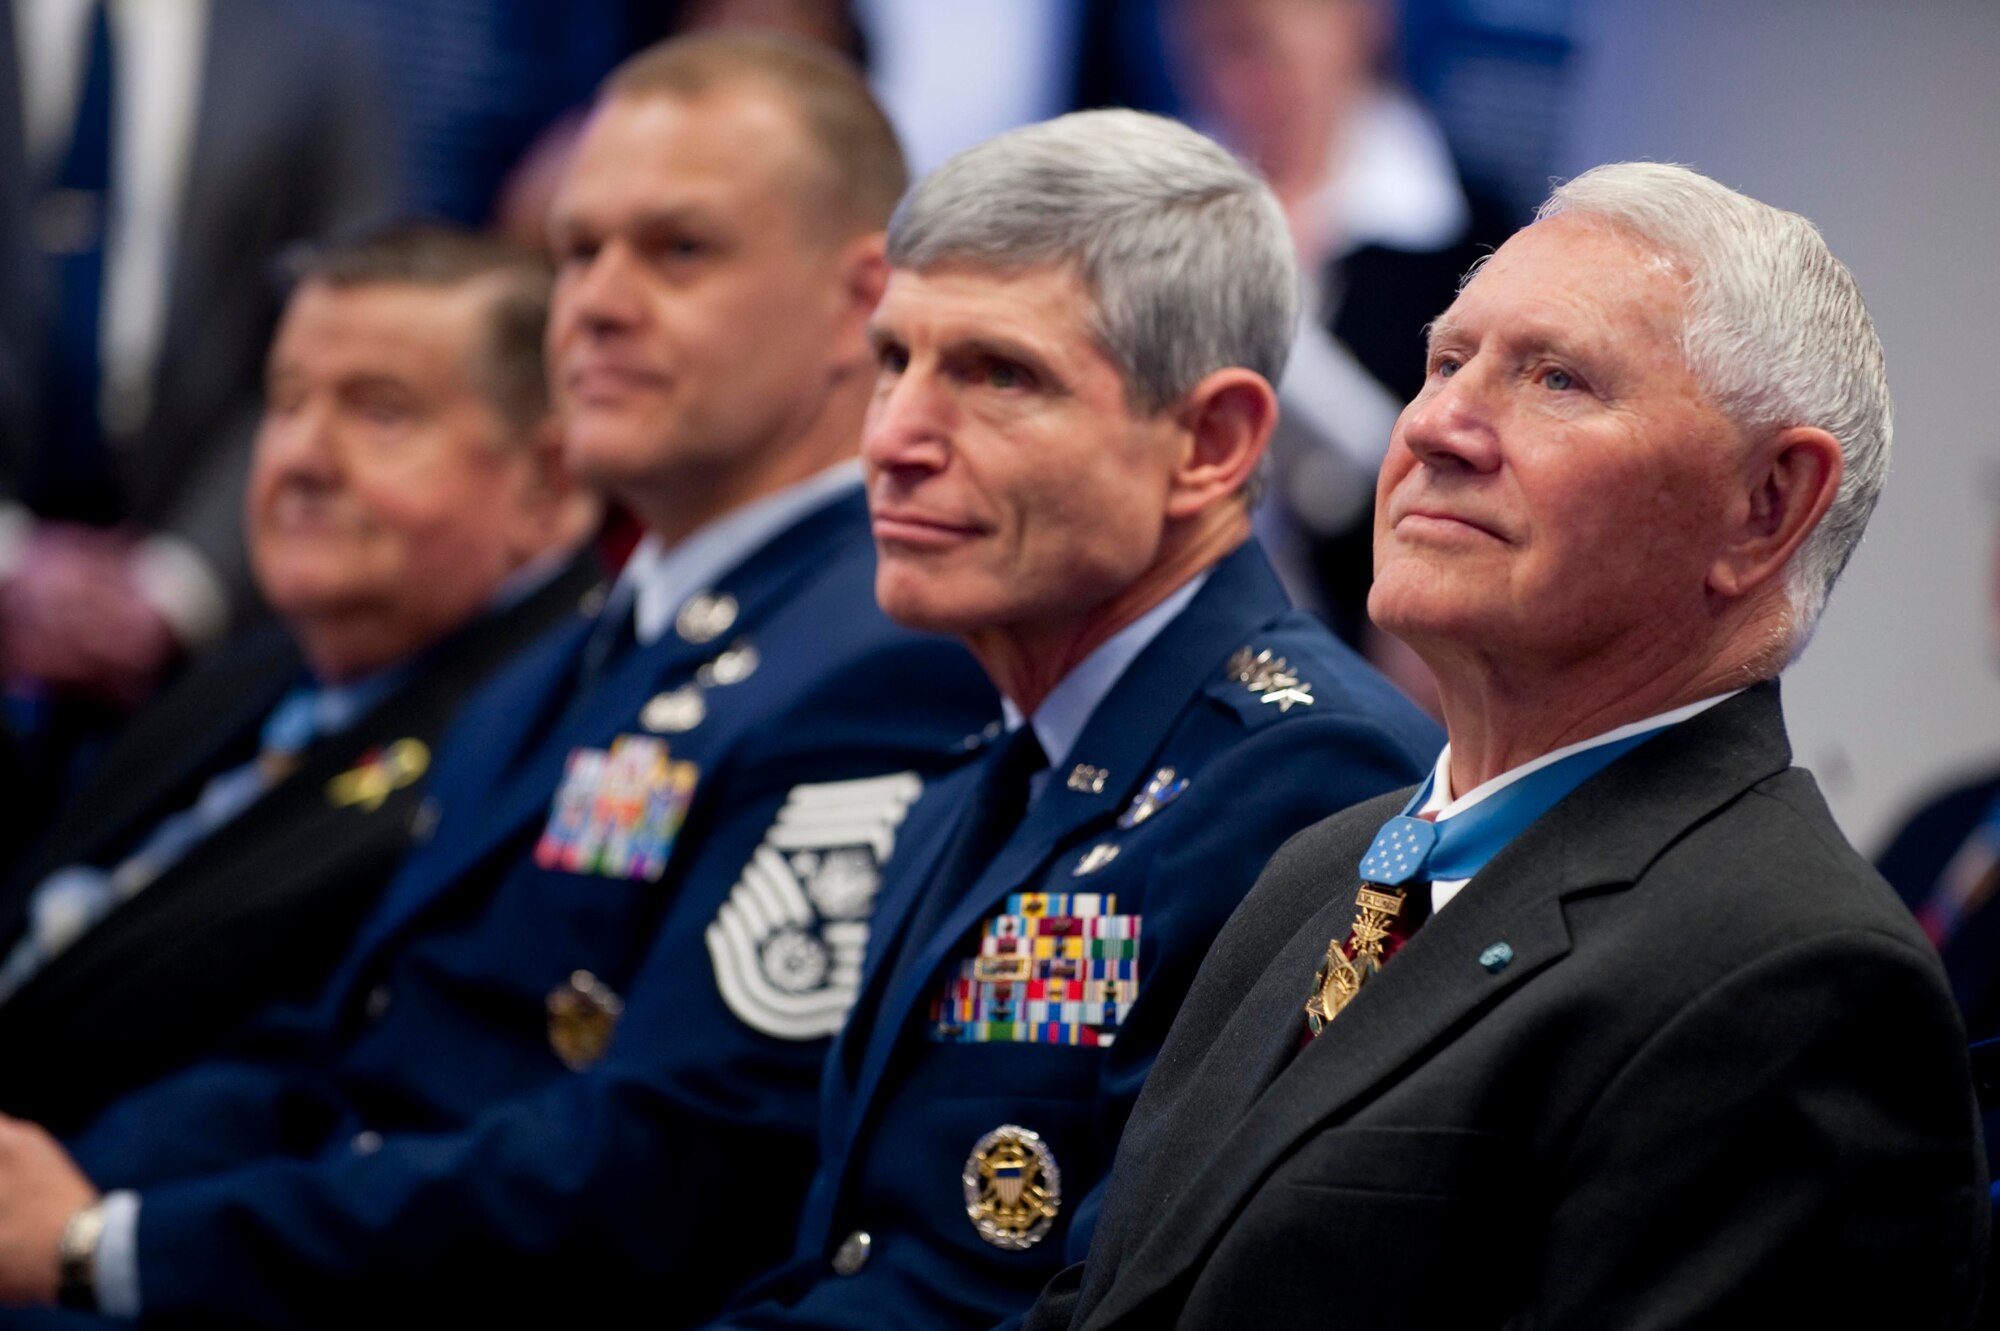 Retired Col. Leo K. Thorsness, president of the Congressional Medal of Honor Society; Air Force Chief of Staff Gen. Norton Schwartz; and Chief Master Sgt. of the Air Force James A. Roy listen to a speaker March 25, 2011, during a ceremony honoring the 150th anniversary of the Medal of Honor in the Hall of Heroes at the Pentagon in Washington, D.C. (Department of Defense photo/Petty Officer 1st Class Chad J. McNeeley)